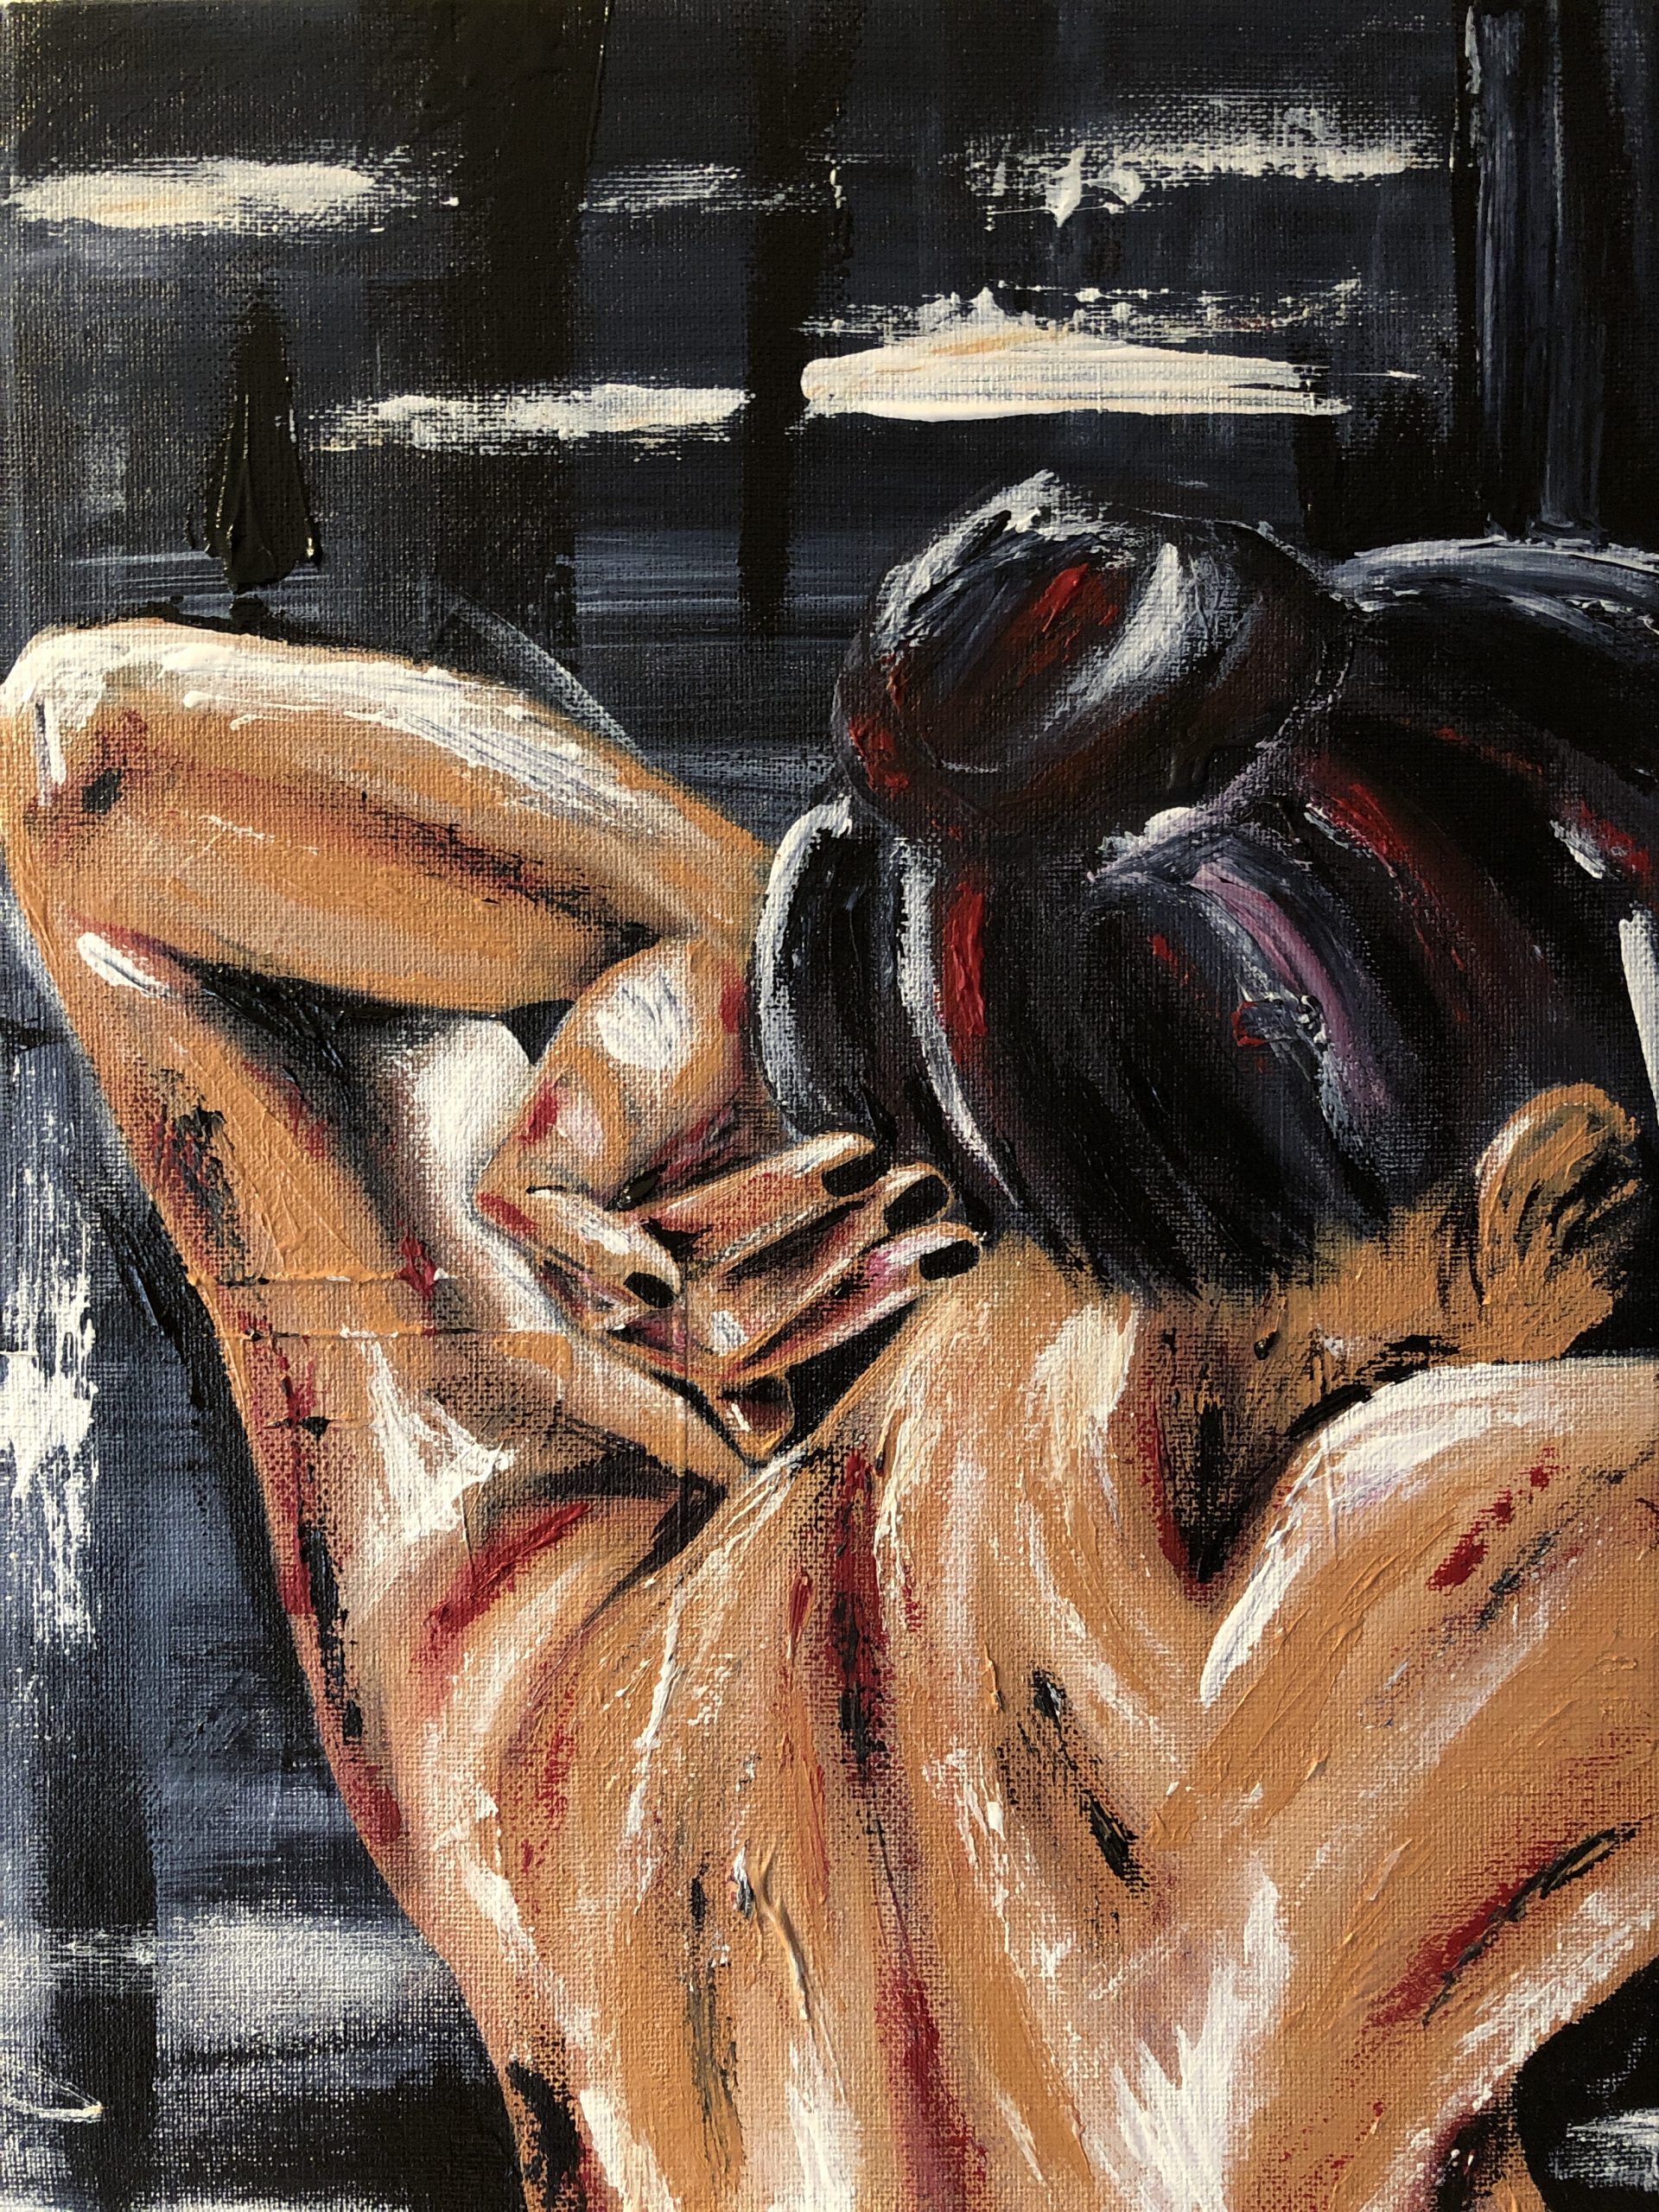 Painting of a woman putting her hair up